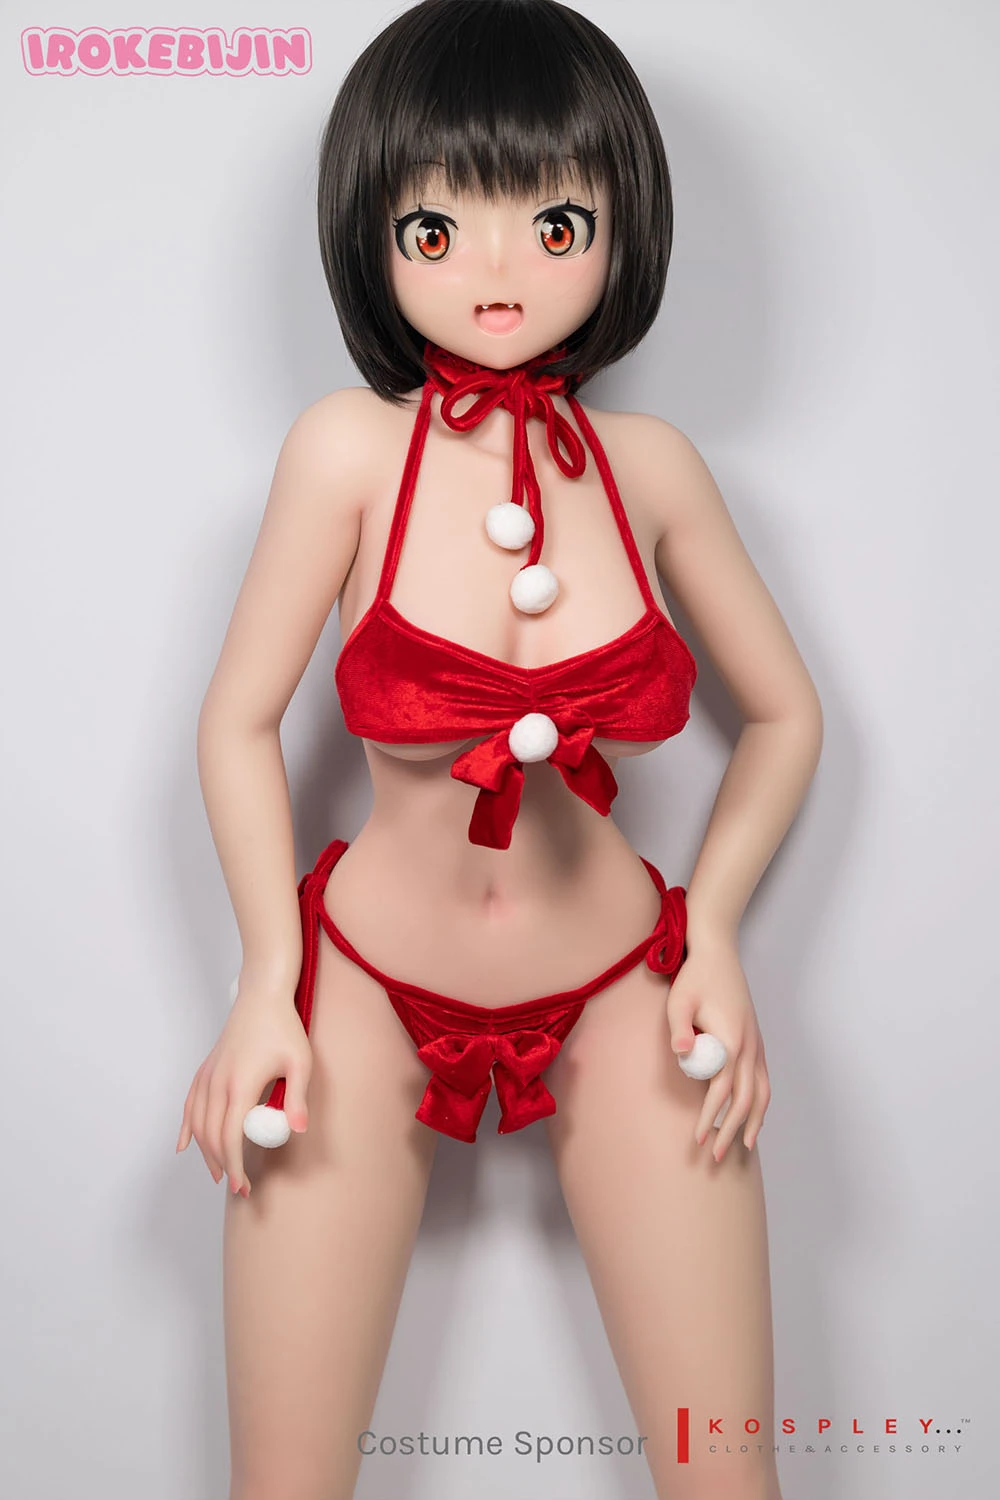 Surprise anime face shape silicone doll